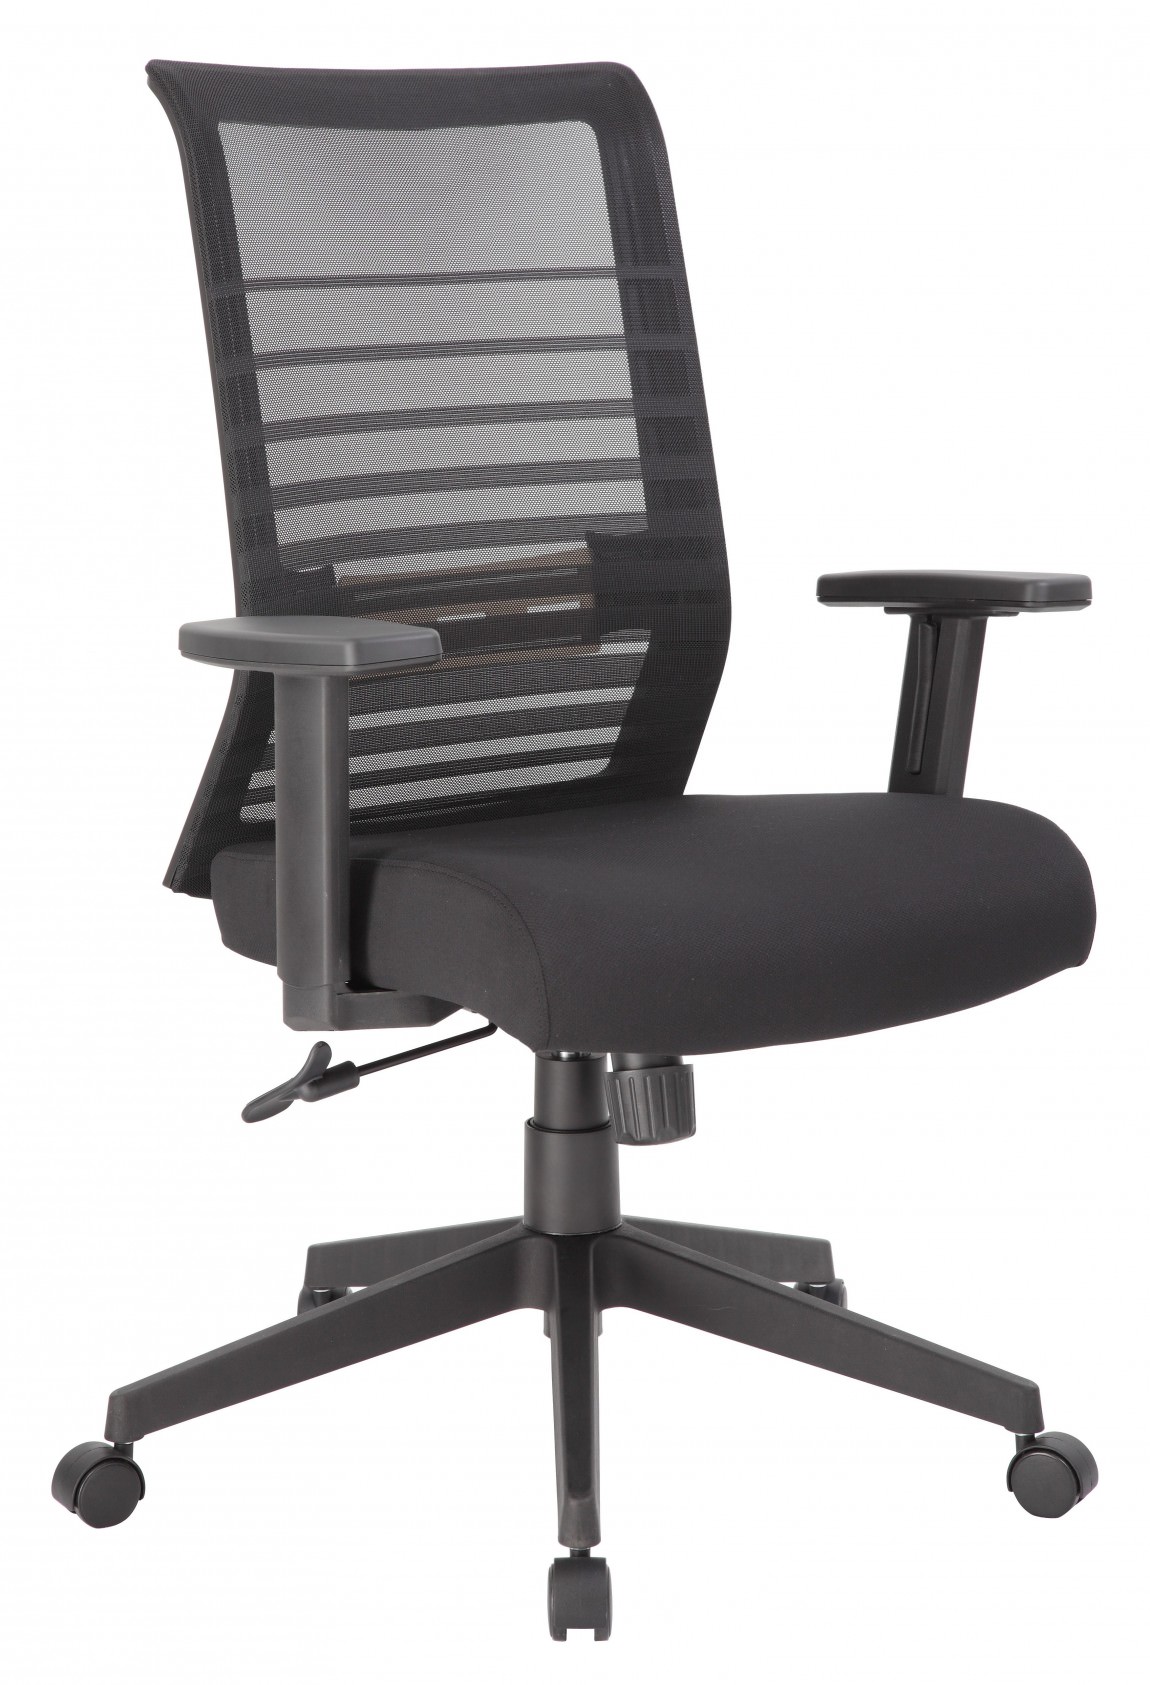 High Back Mesh Executive Chair with Adjustable Lumbar Support - Black